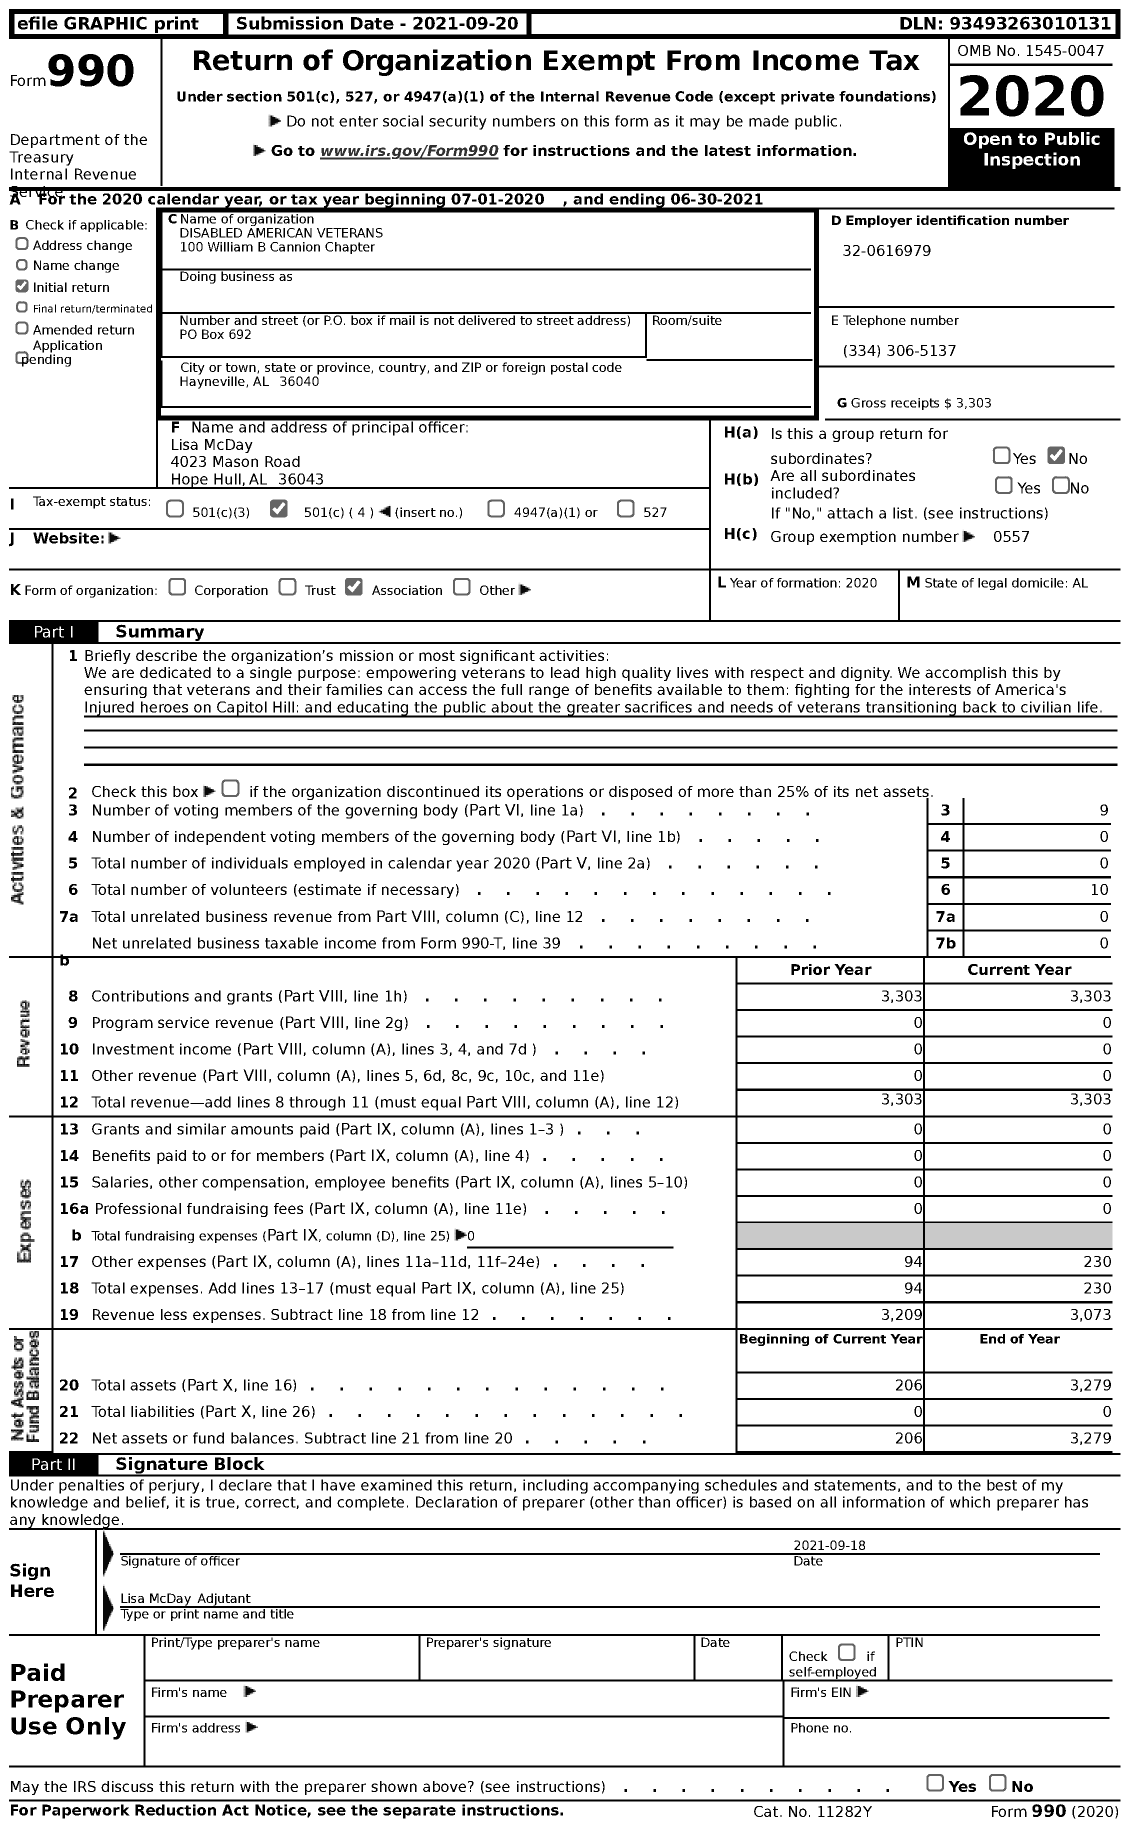 Image of first page of 2020 Form 990 for DISABLED AMERICAN VETERANS - 100 William B Cannion